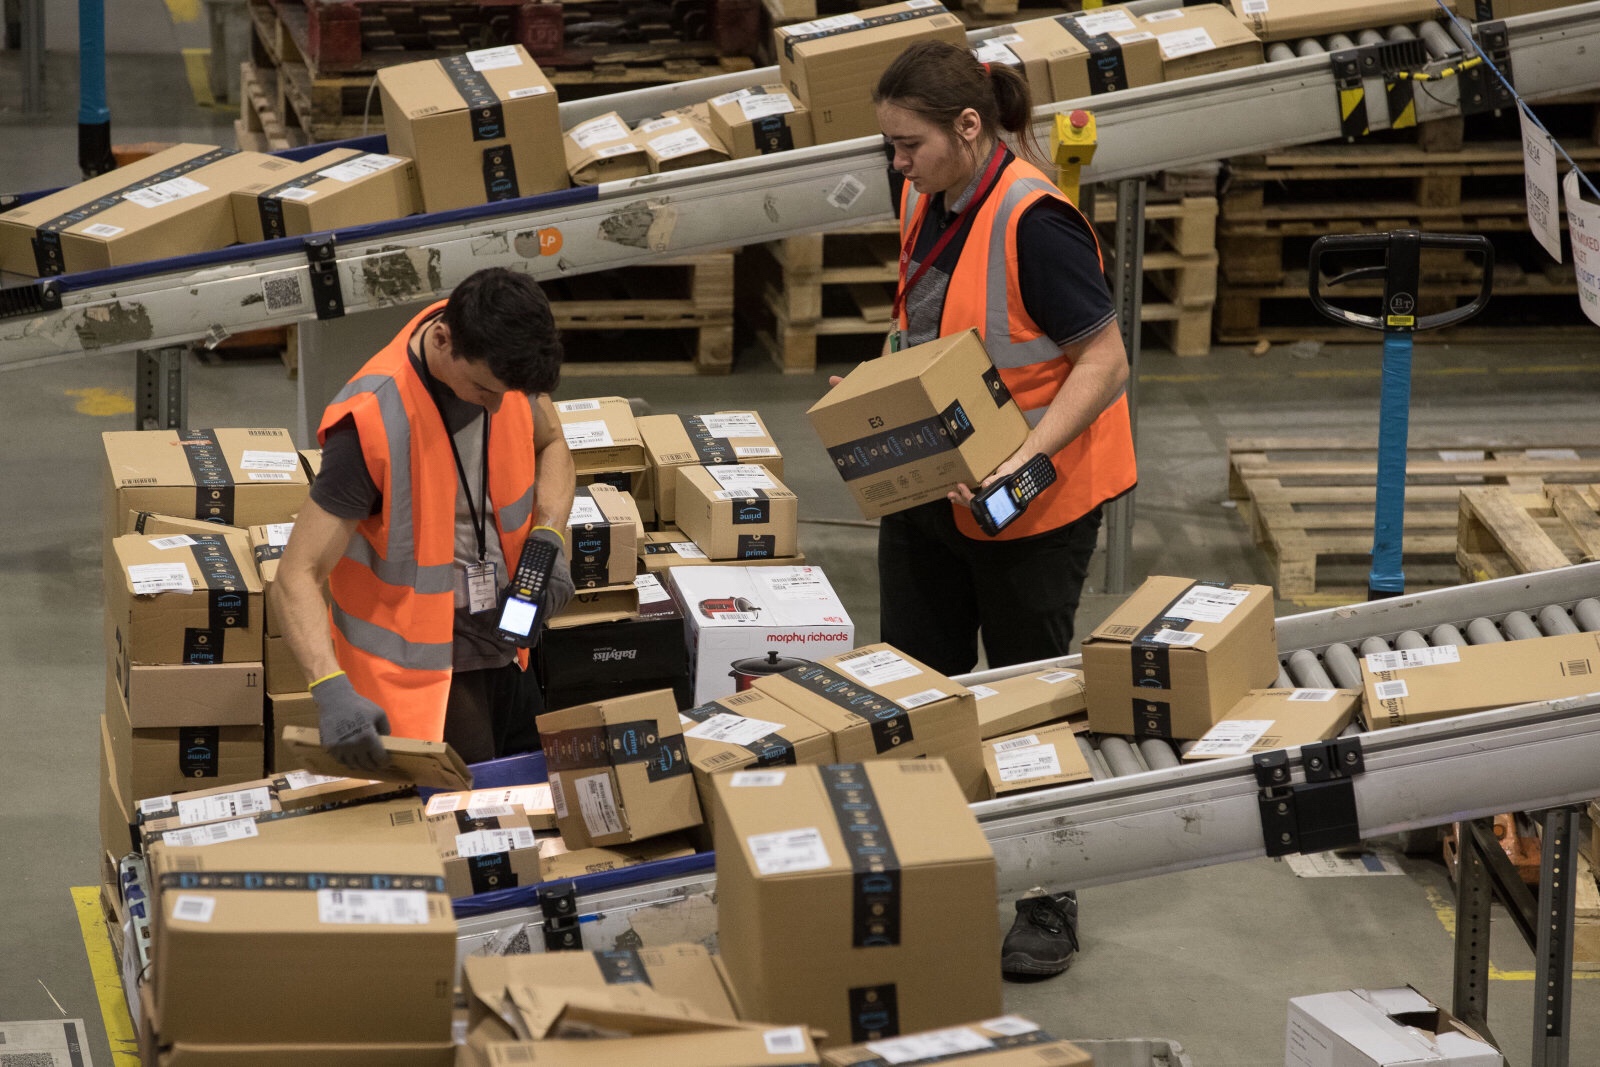 New Amazon patent gives details on hand-tracking wristbands for warehouse workers